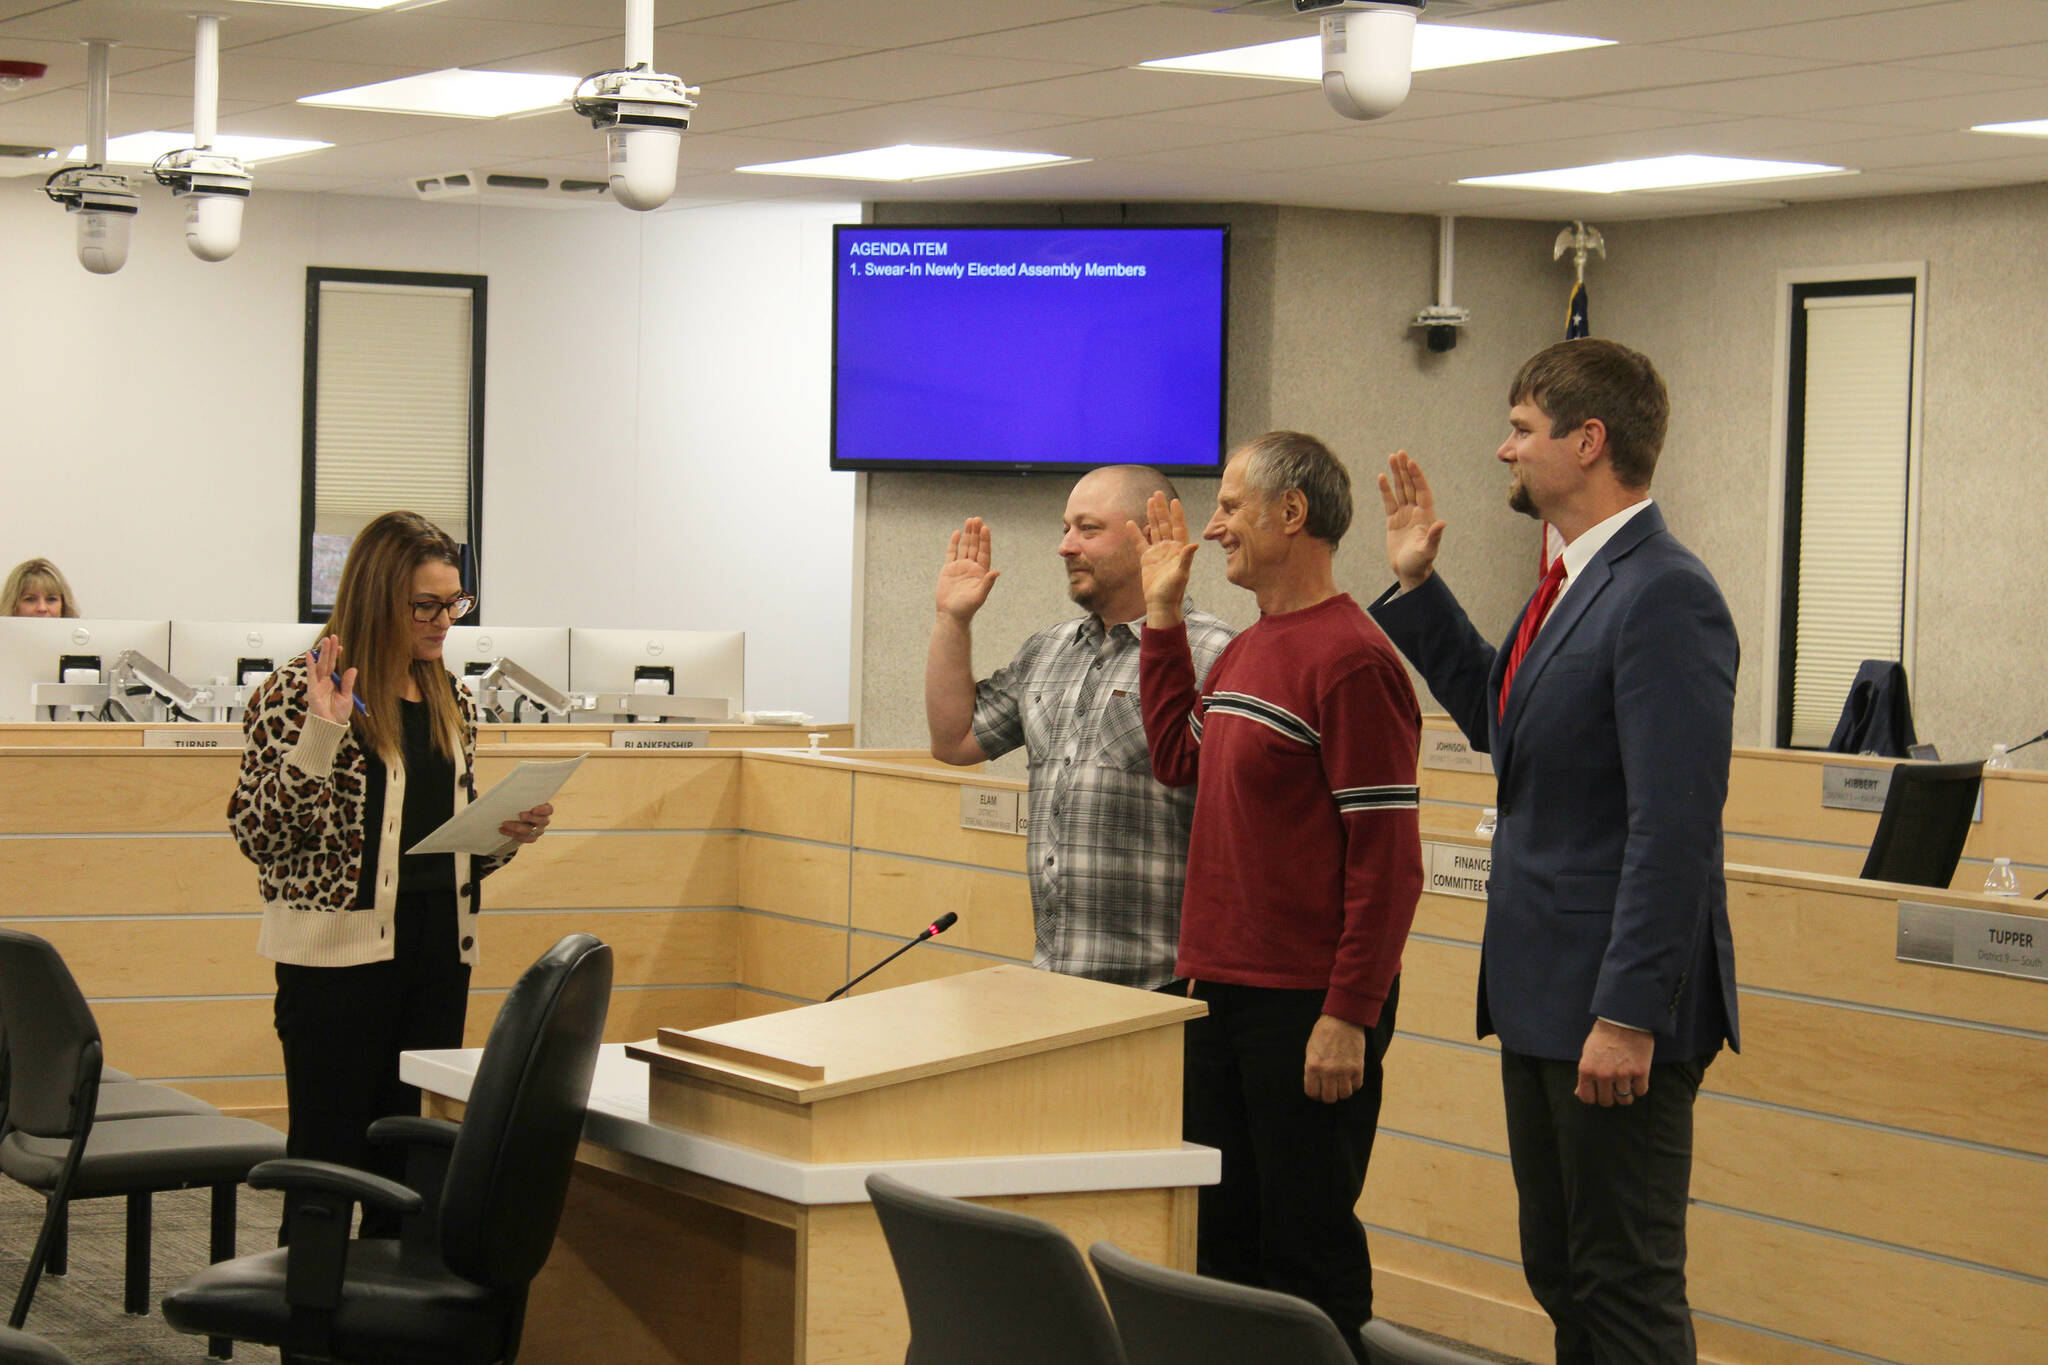 From left: Kenai Peninsula Borough Clerk Johni Blankenship swears in newly reelected assembly members Tyson Cox, Brent Johnson and Jesse Bjorkman during a meeting on Tuesday, Oct. 11, 2022. (Ashlyn O’Hara/Peninsula Clarion)